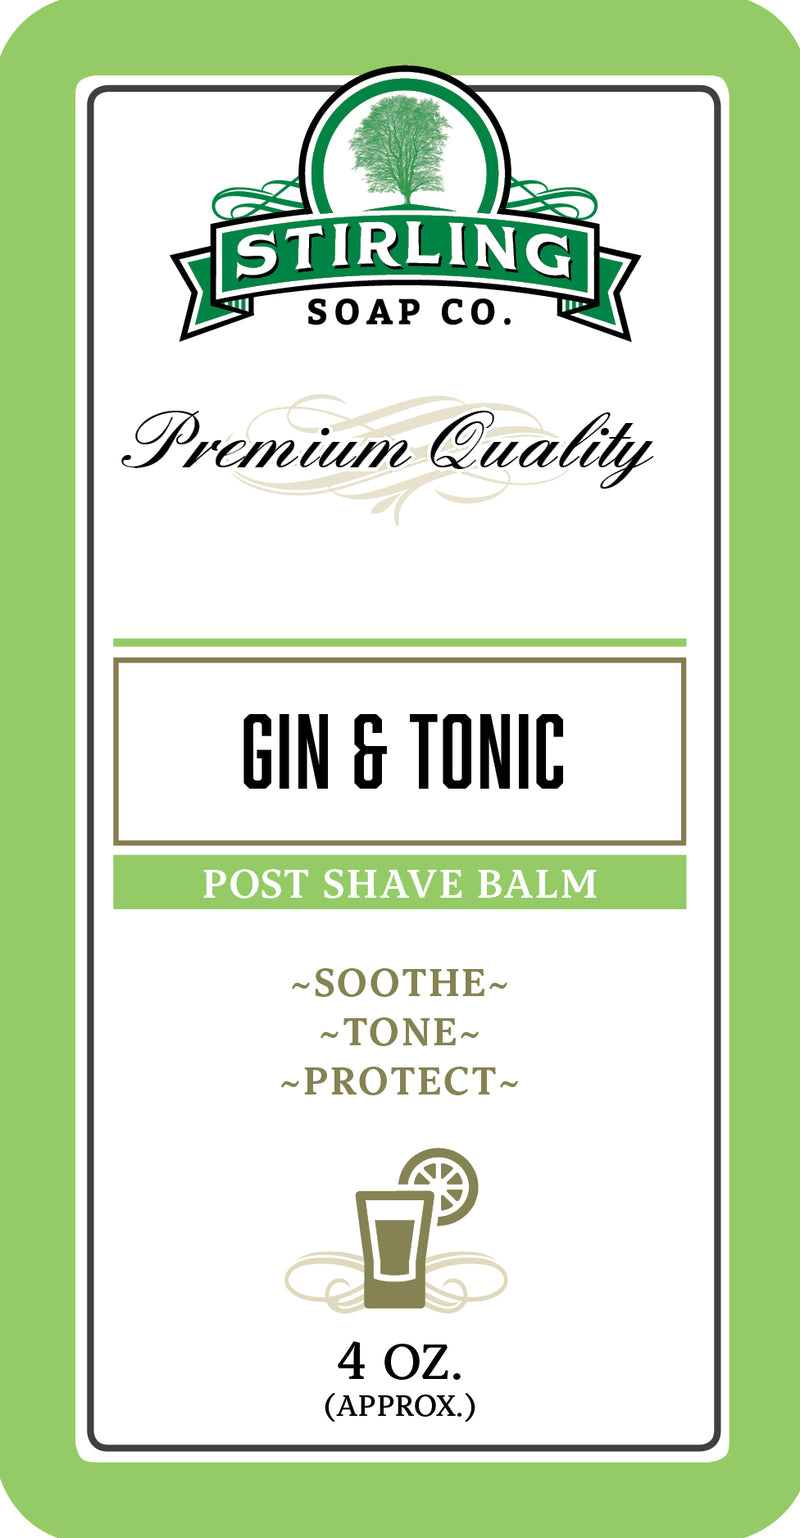 Gin & Tonic - Post-Shave Balm